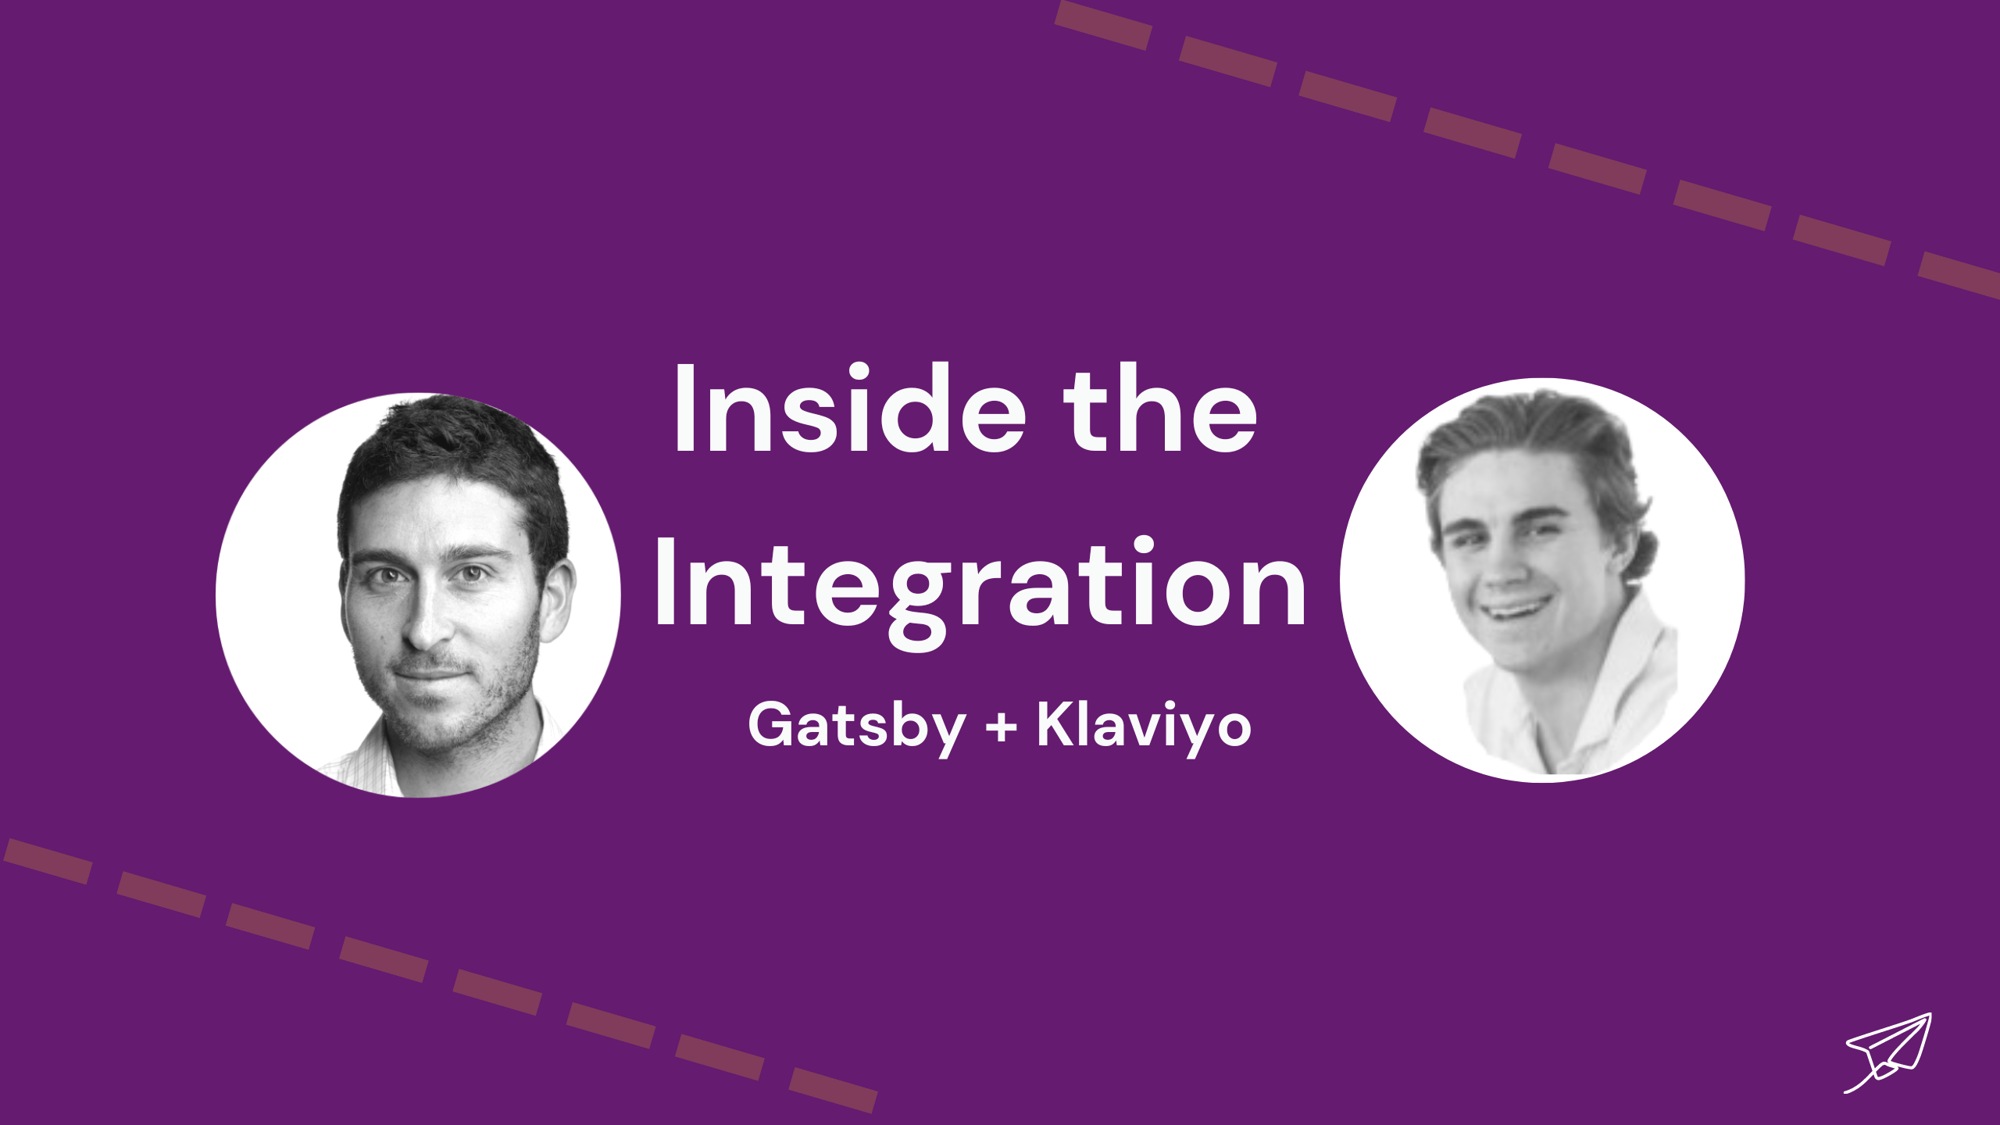 Inside The Integration with Gatsby and Klaviyo